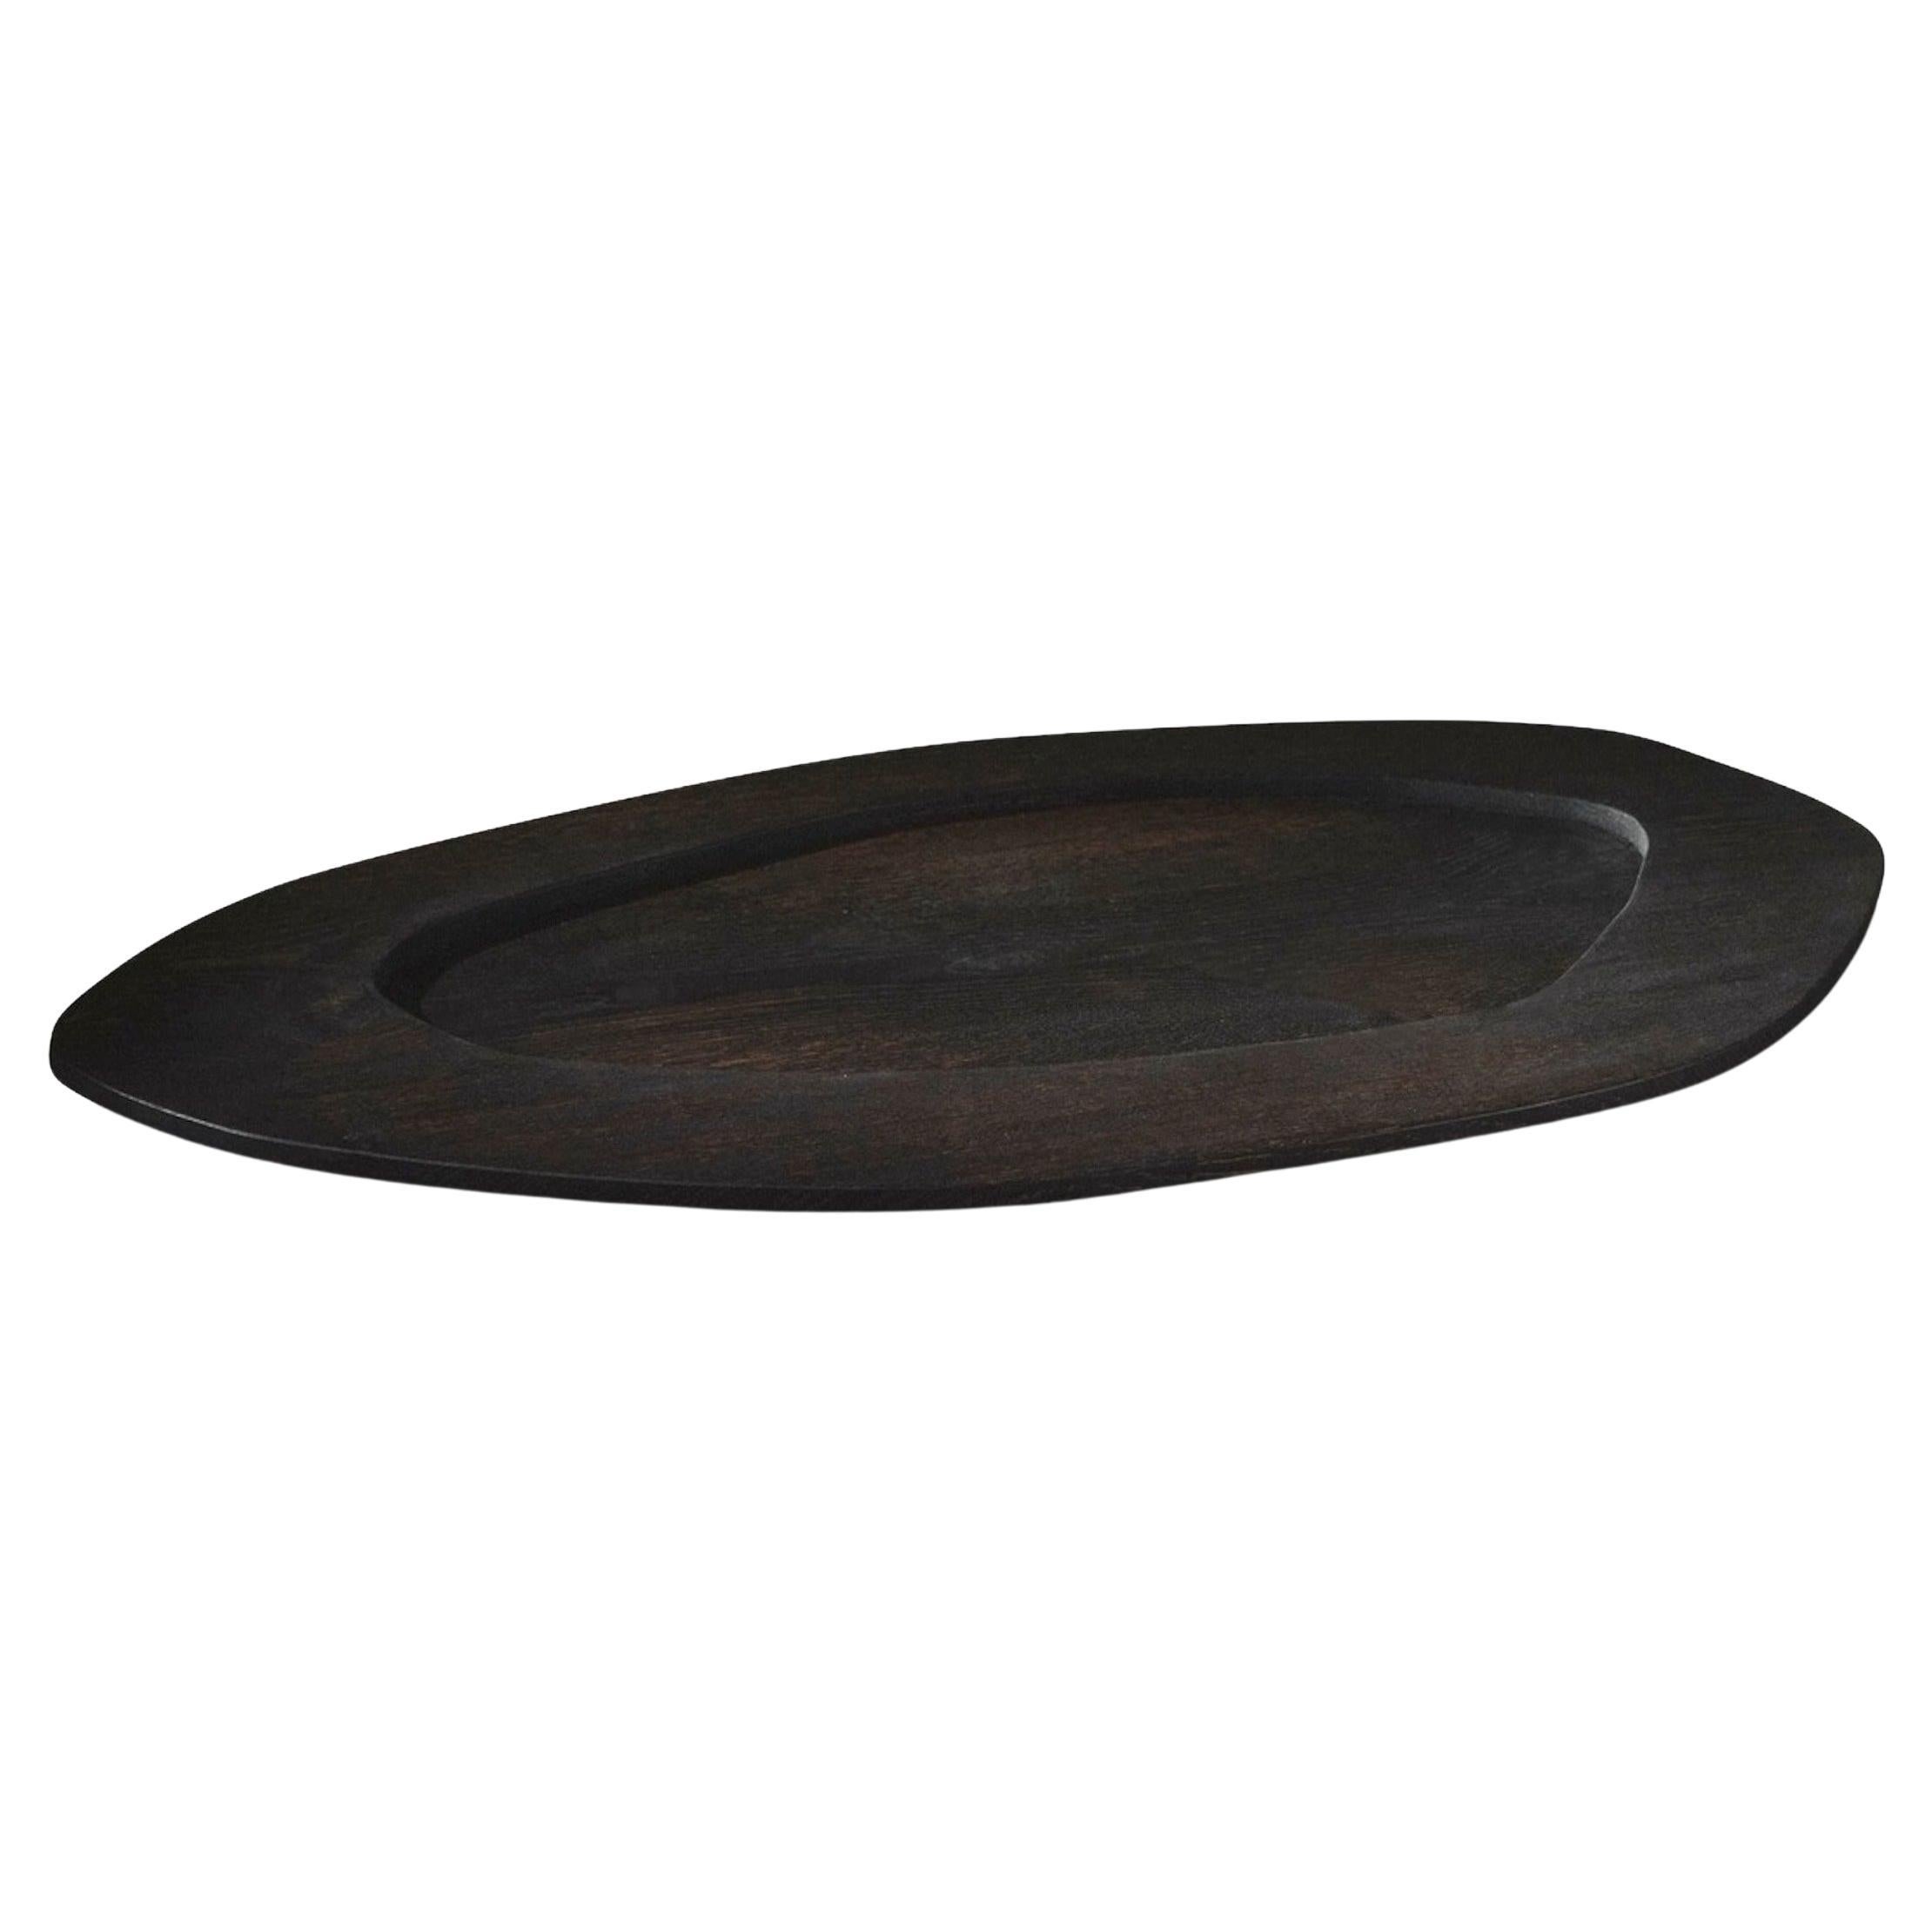 C + J Oak Tray by Fora Projects 
Designed by Christian + Jade

Material: Oak wood
Color: Black brown
Brown surface treatment with non-toxic hardwax oil

Dimensions: (Large) 
H. 3 - L. 84 - W. 45 cm 

_______________

The C + J tray was designed by